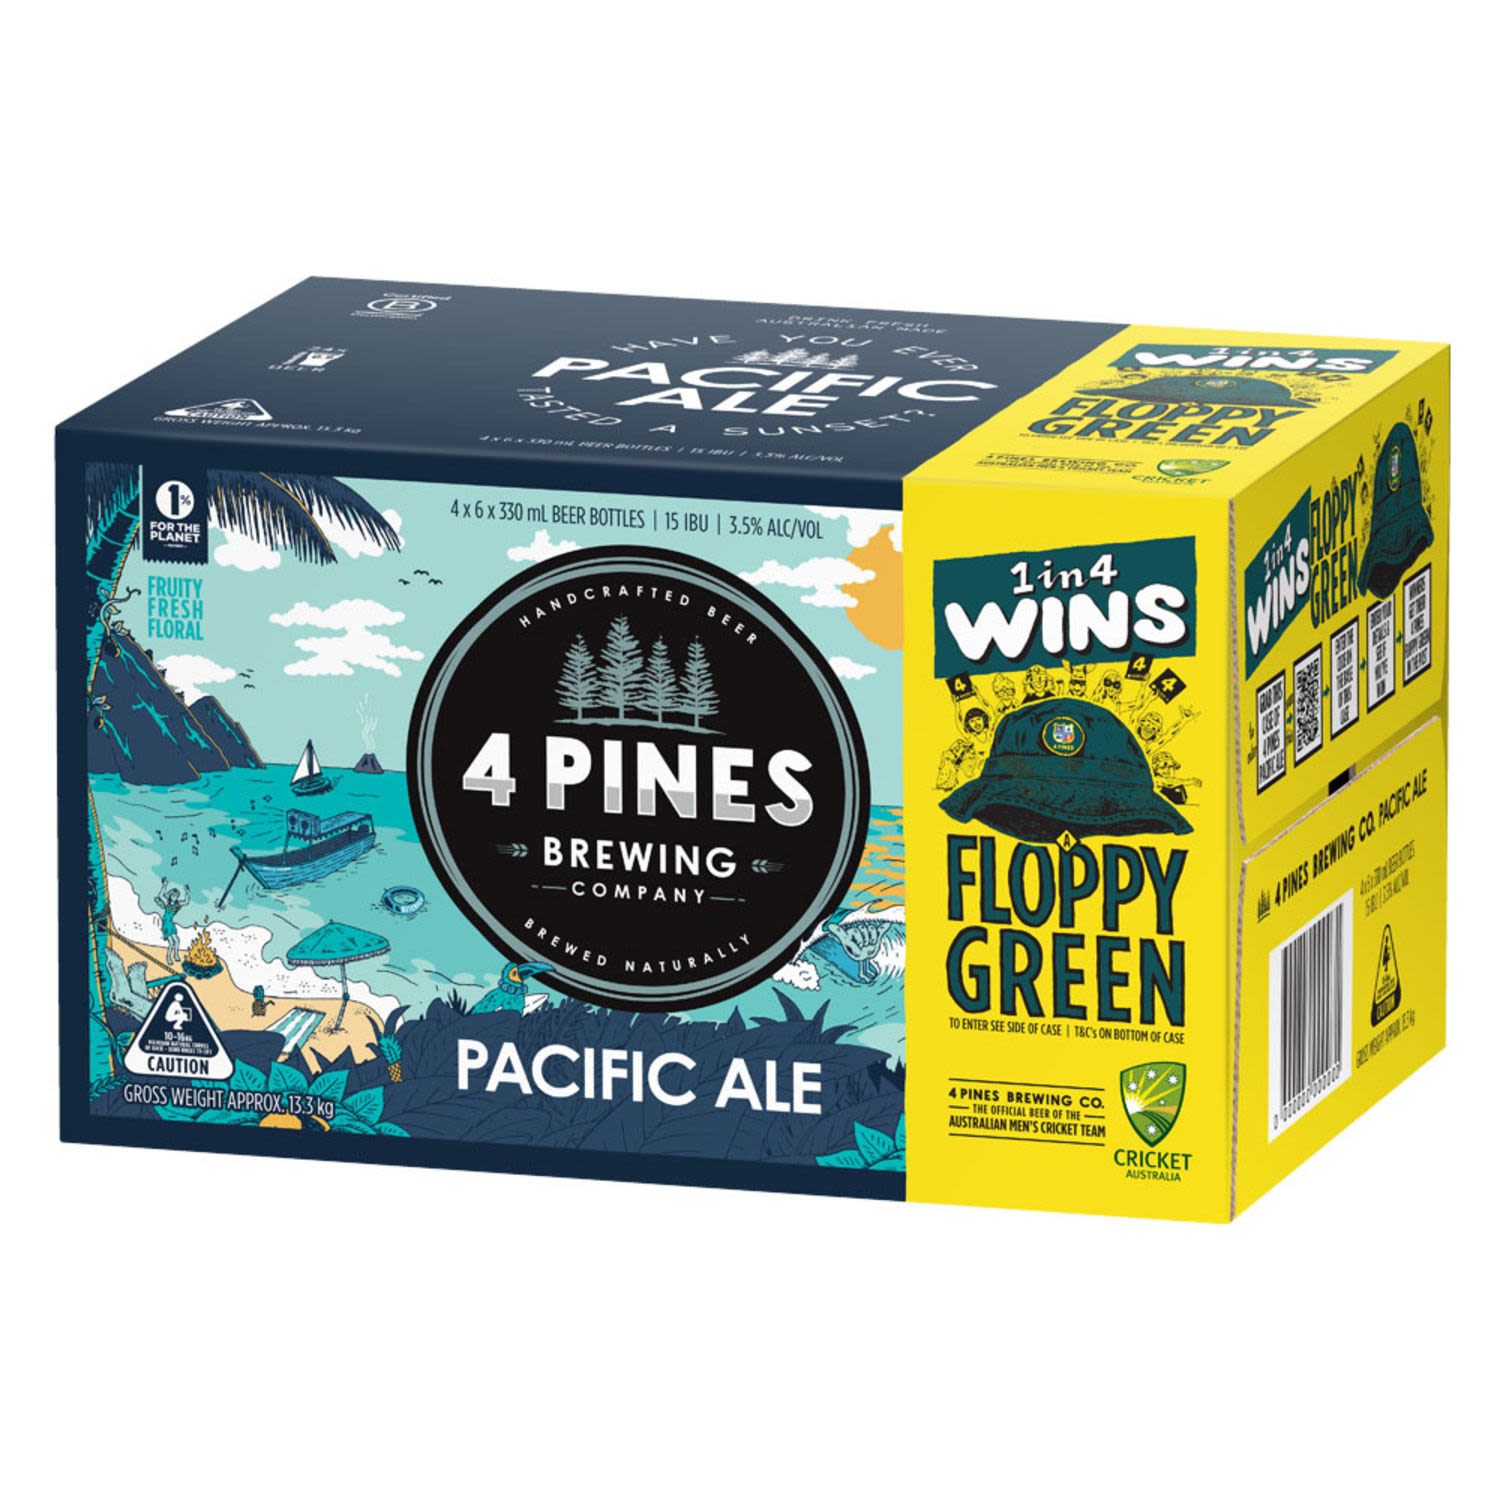 Hazy golden in appearance. Big fruity hop aromas of passionfruit, pineapple and pear are complemented by a smooth, dry finish.<br /> <br />Alcohol Volume: 3.50%<br /><br />Pack Format: 24 Pack<br /><br />Standard Drinks: 0.9<br /><br />Pack Type: Bottle<br /><br />Country of Origin: Australia<br />